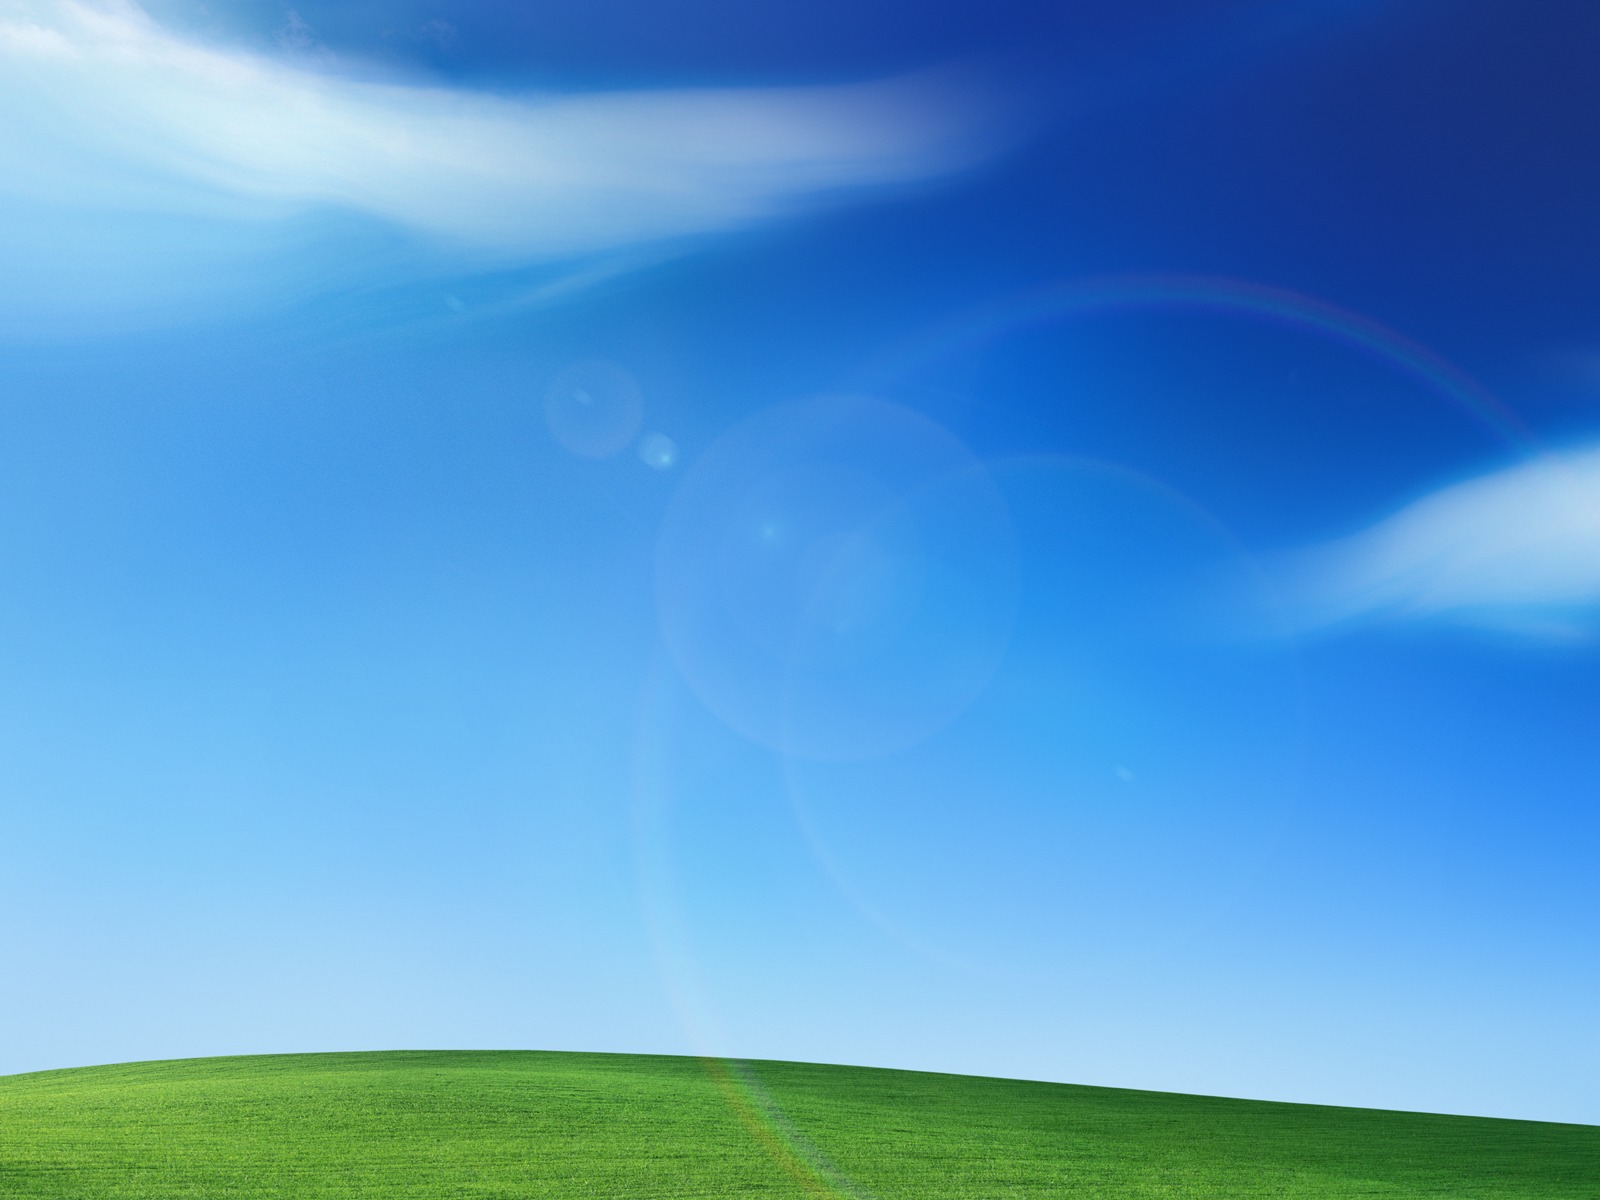 Microsoft introduces the new Windows 10 wallpaper named 